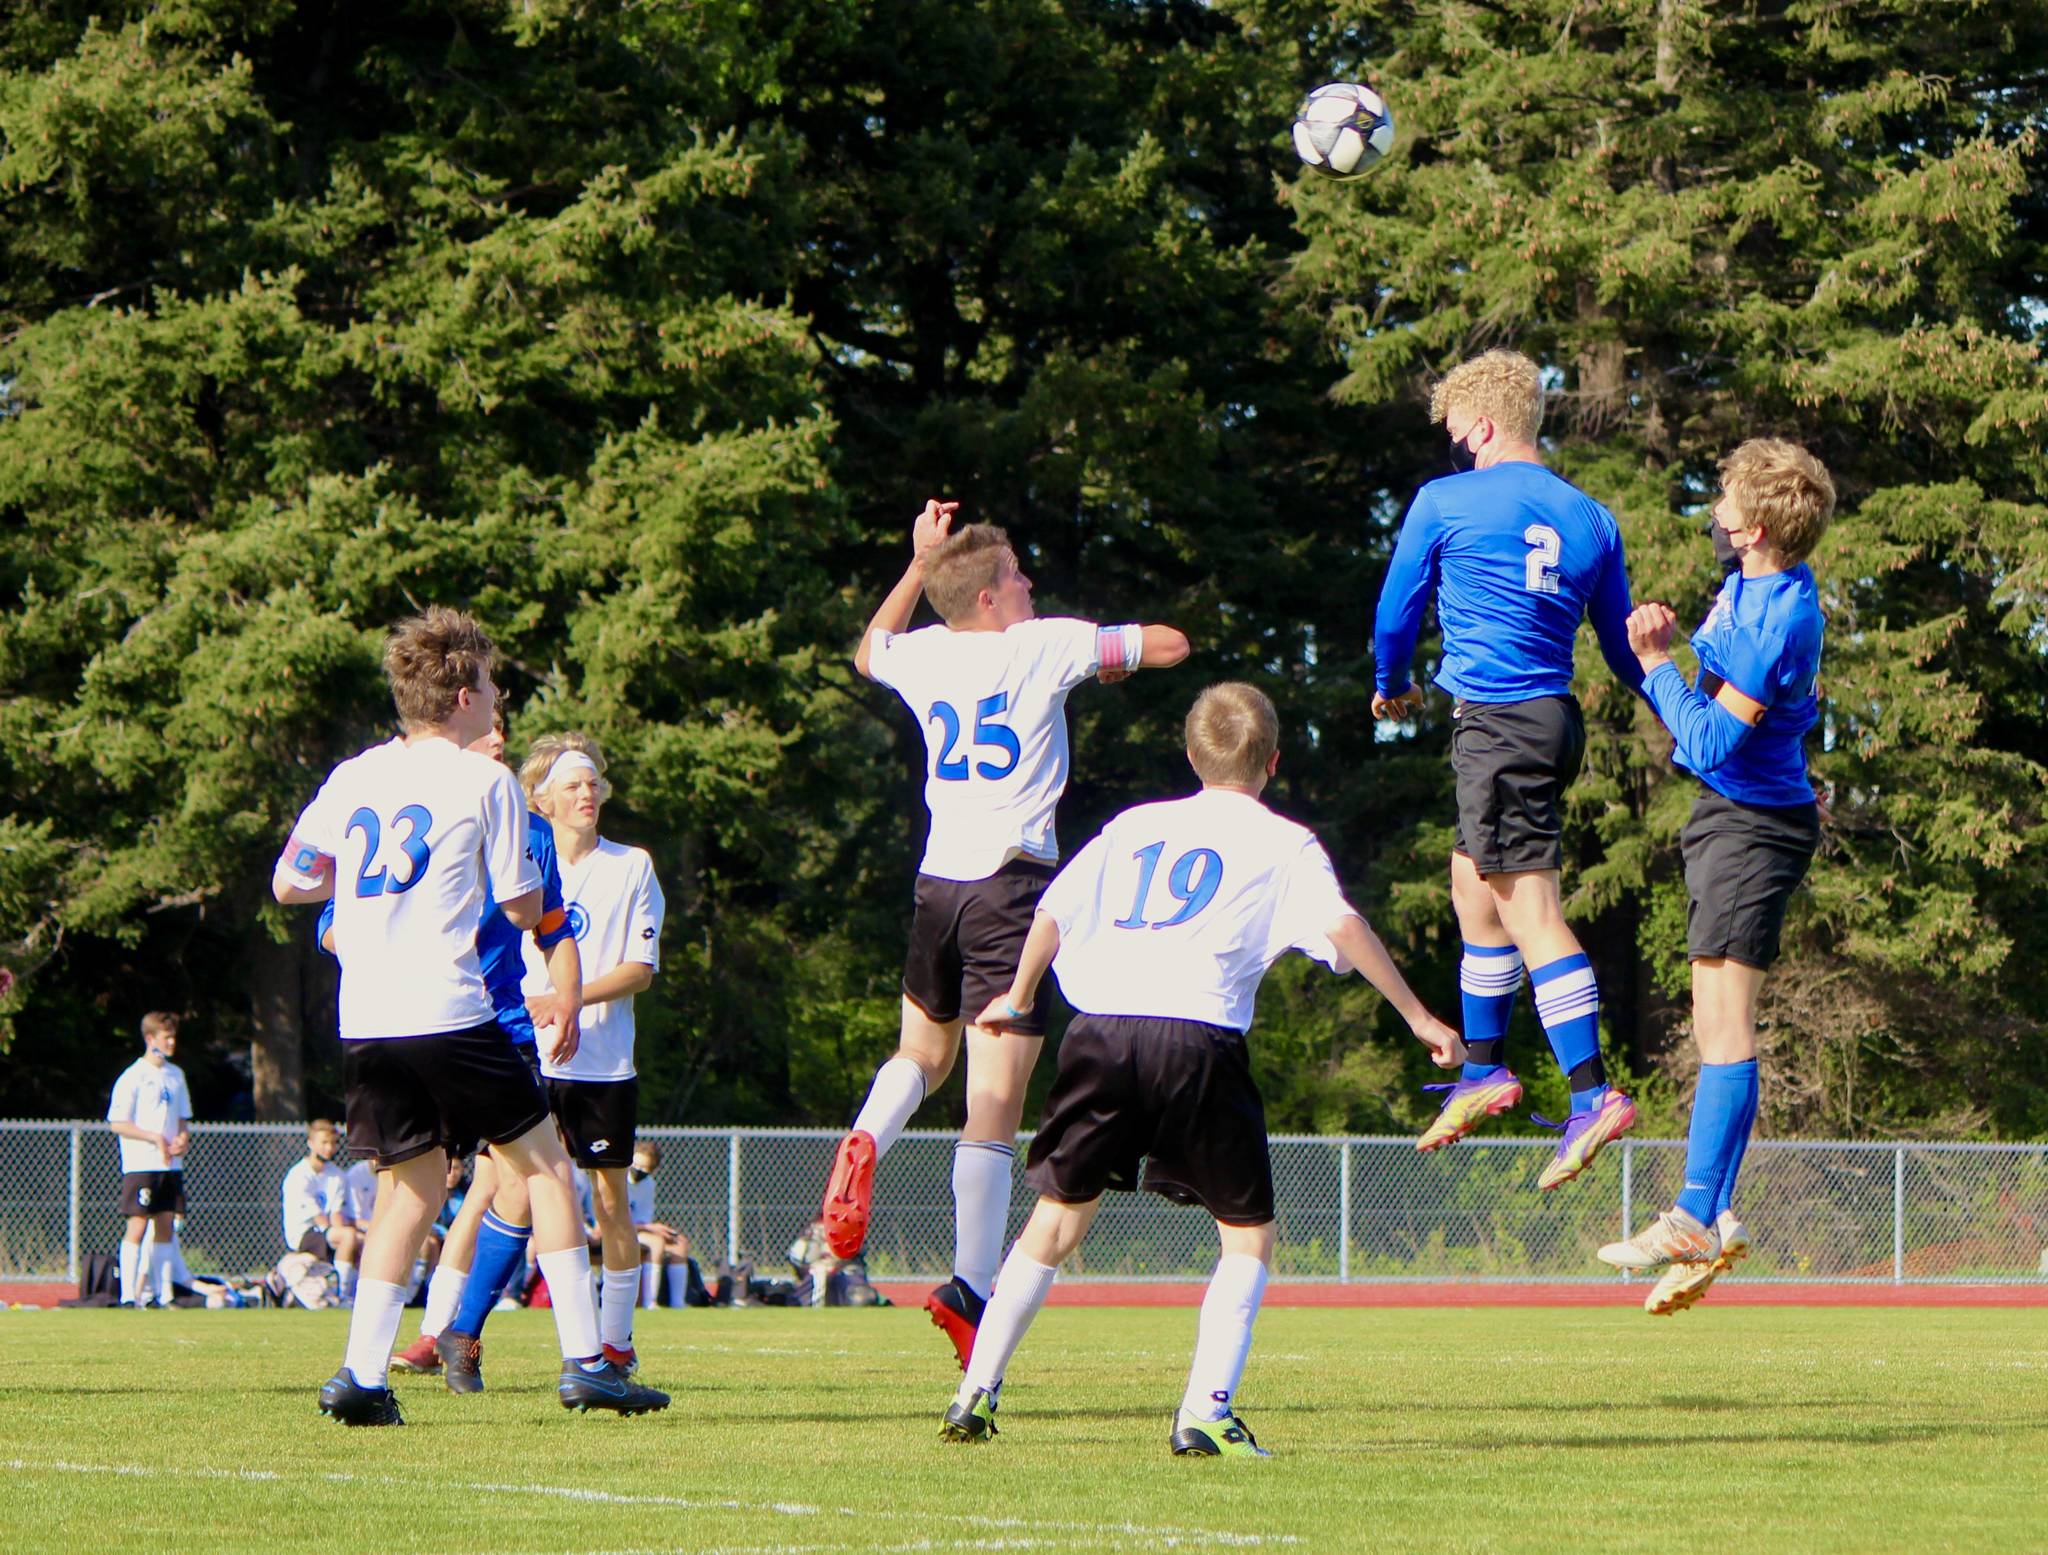 Corey Wiscomb/contributed photo
Tomas Holmes elevates his game for a header opportunity.